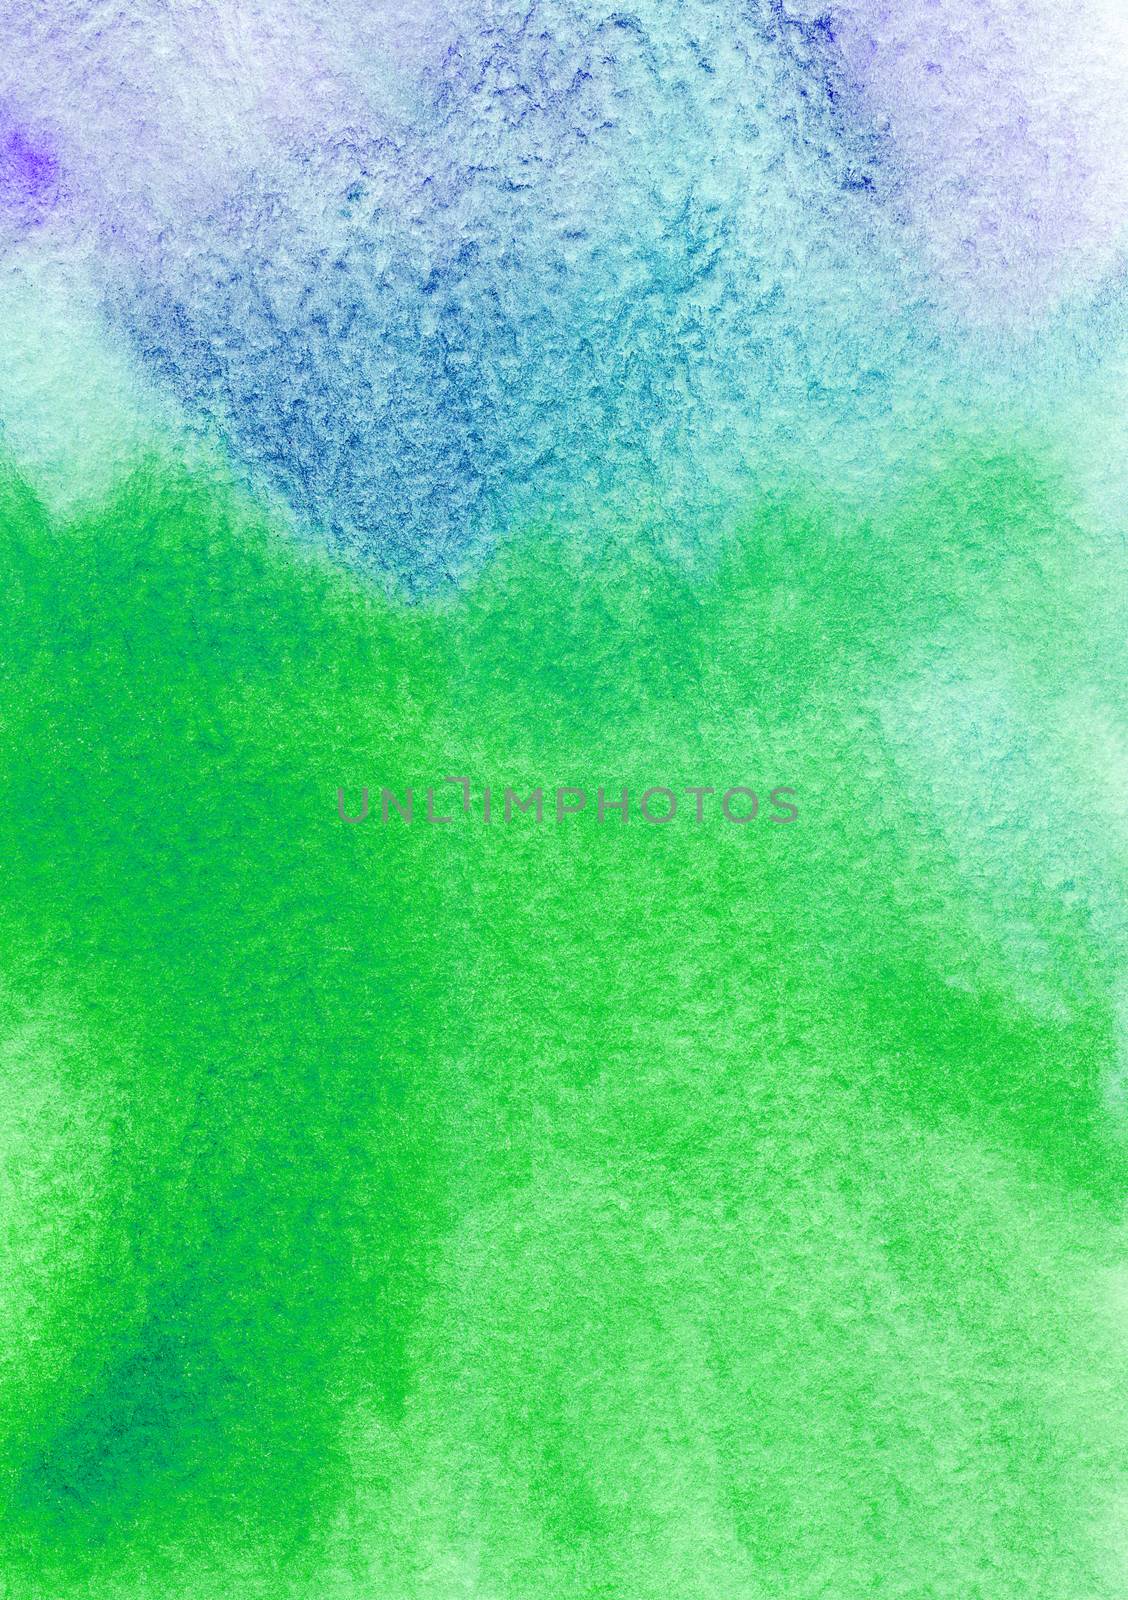 Blue and green watercolors on textured paper background. Grunge pattern. .Raster illustration colorful paint brush with space for text, for media advertising website fashion concept design, banner by LanaLeta